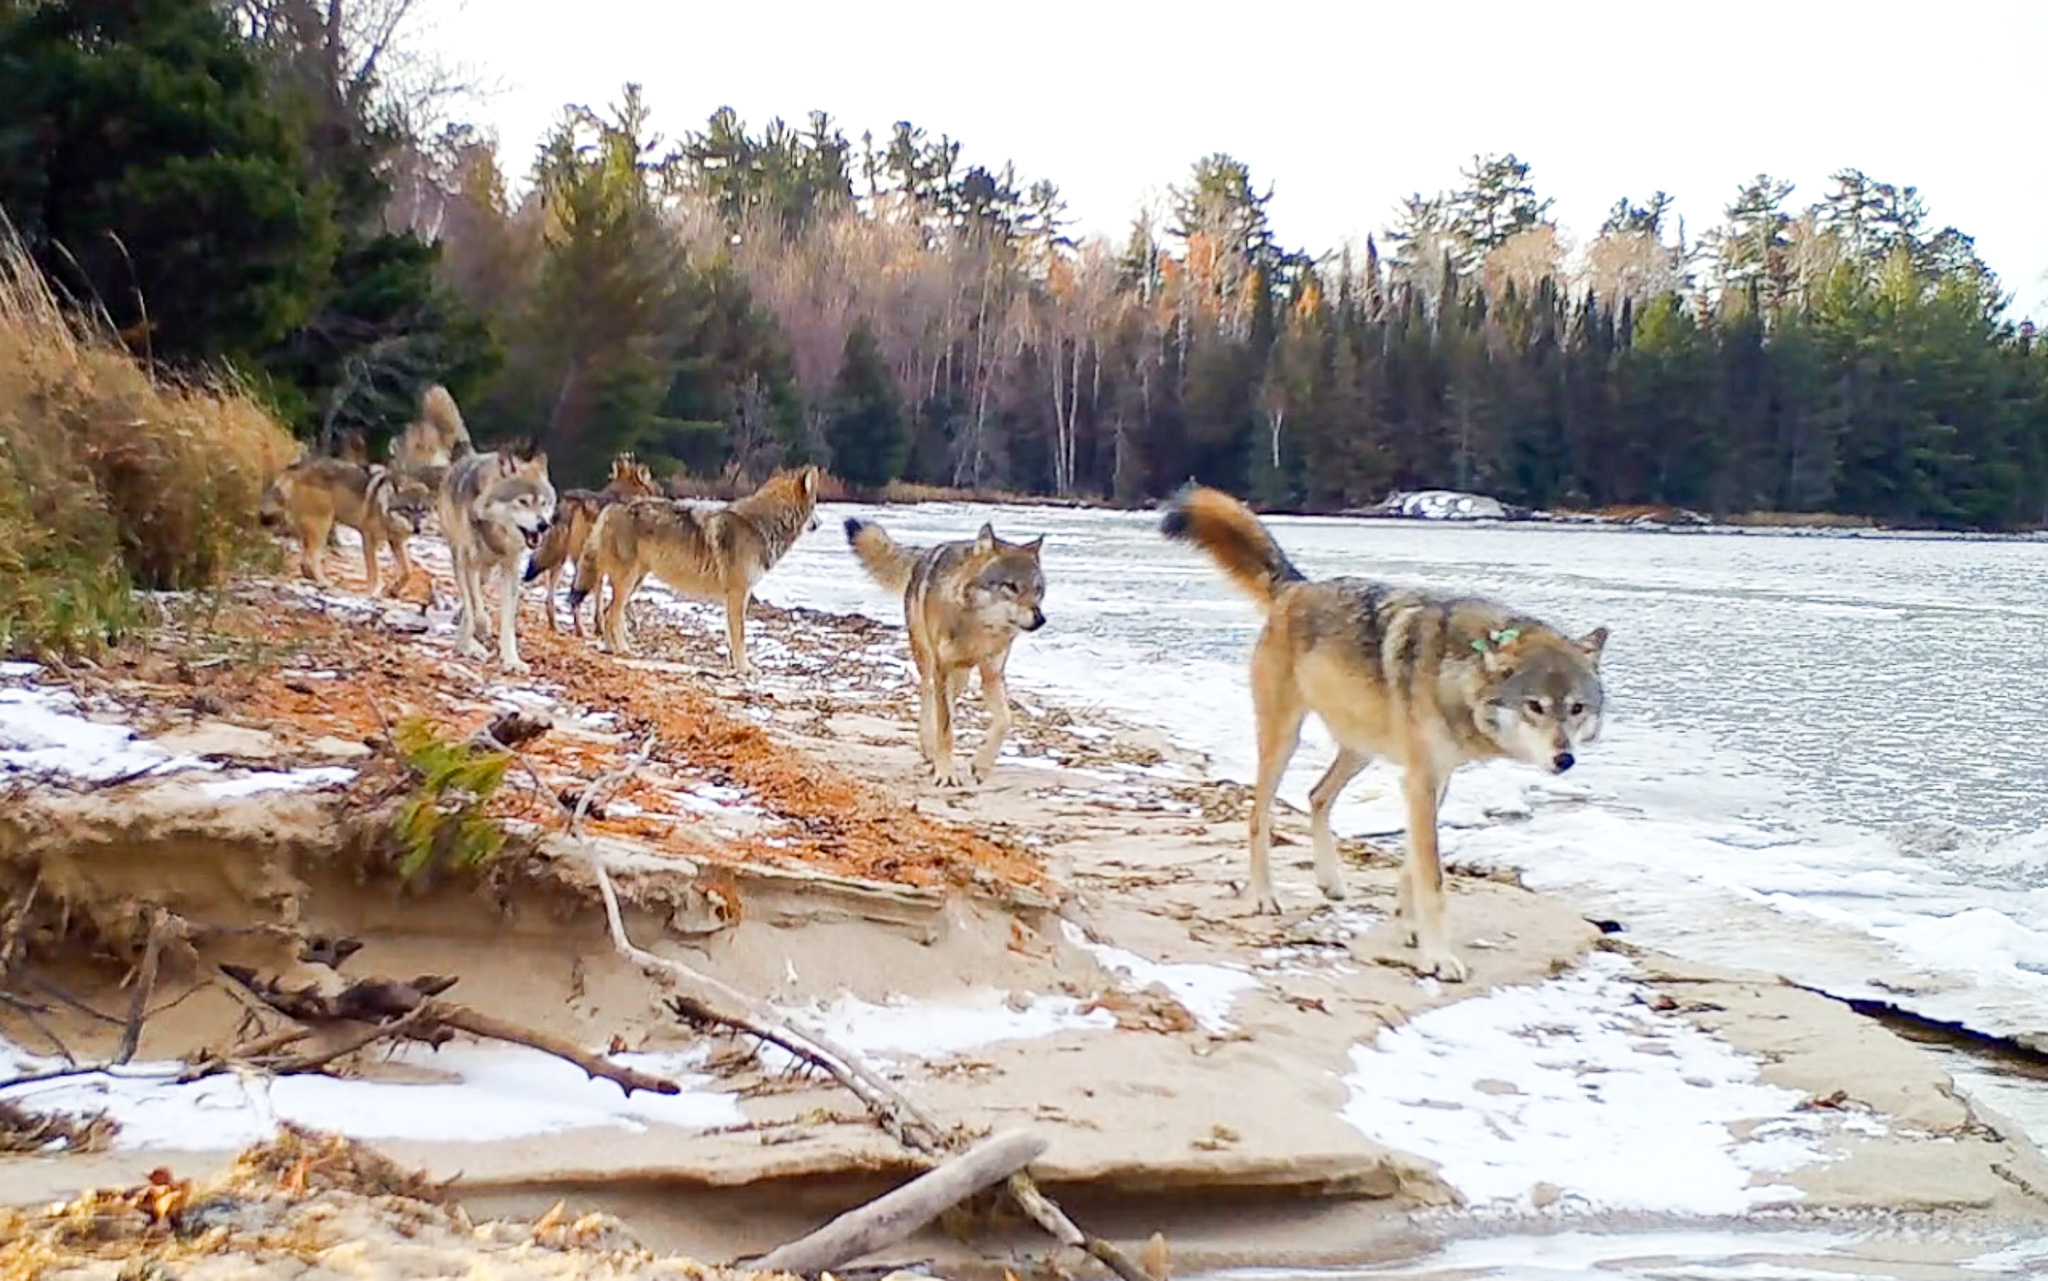 Trail camera footage of the Shoepack Lake Pack walking along a sandy beach in Voyageurs National Park in Fall.